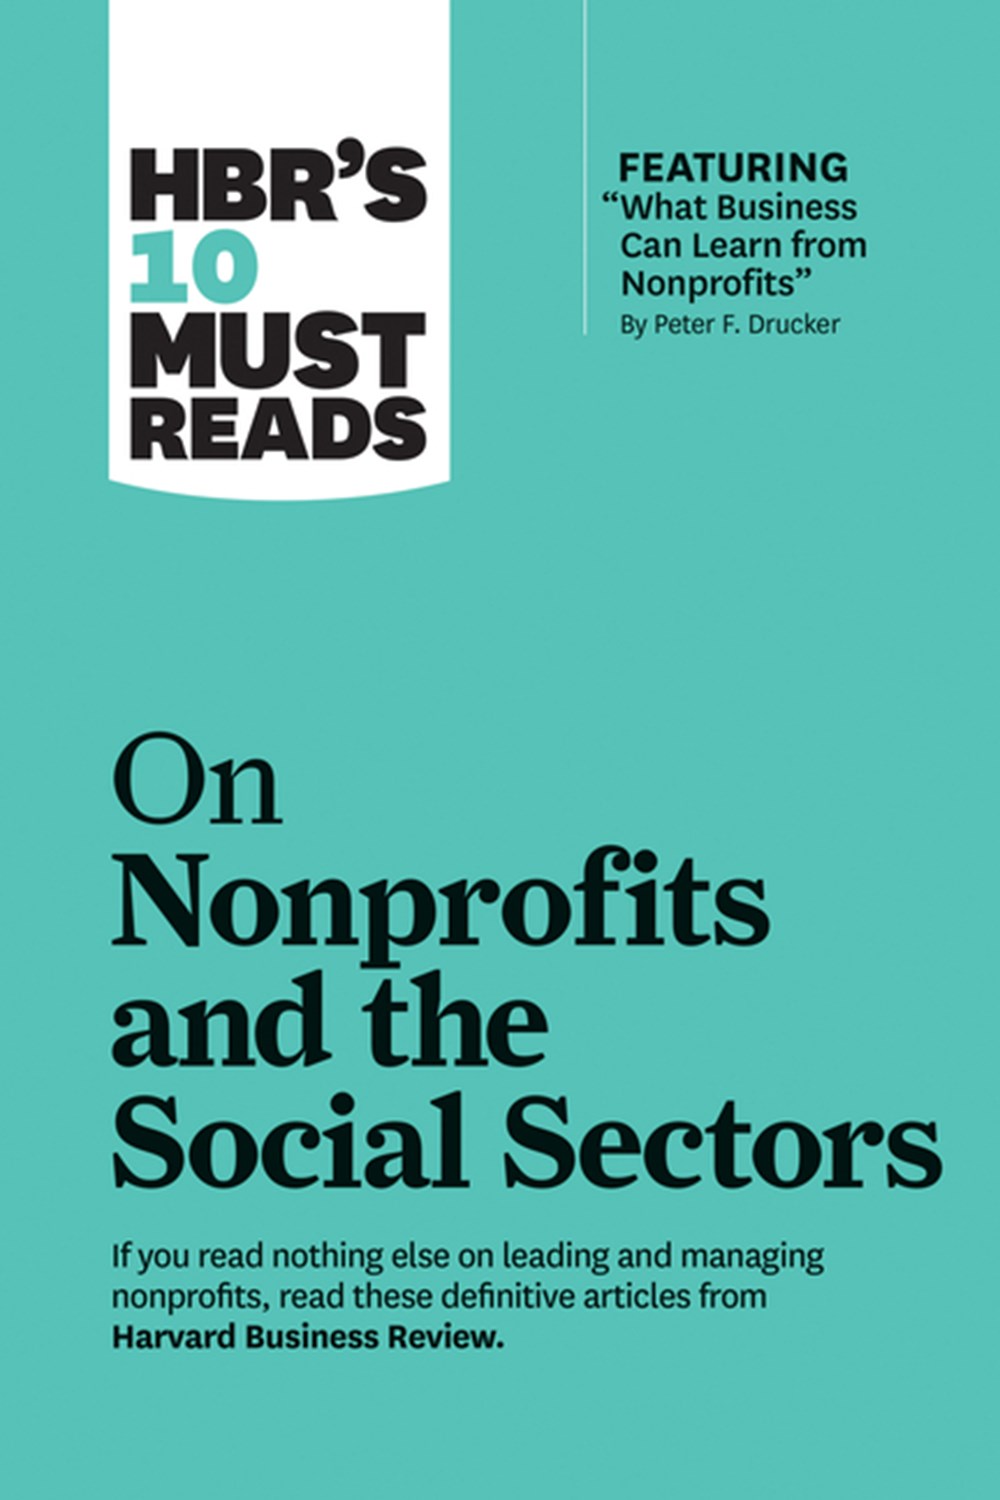 Hbr's 10 Must Reads on Nonprofits and the Social Sectors (Featuring "what Business Can Learn from No